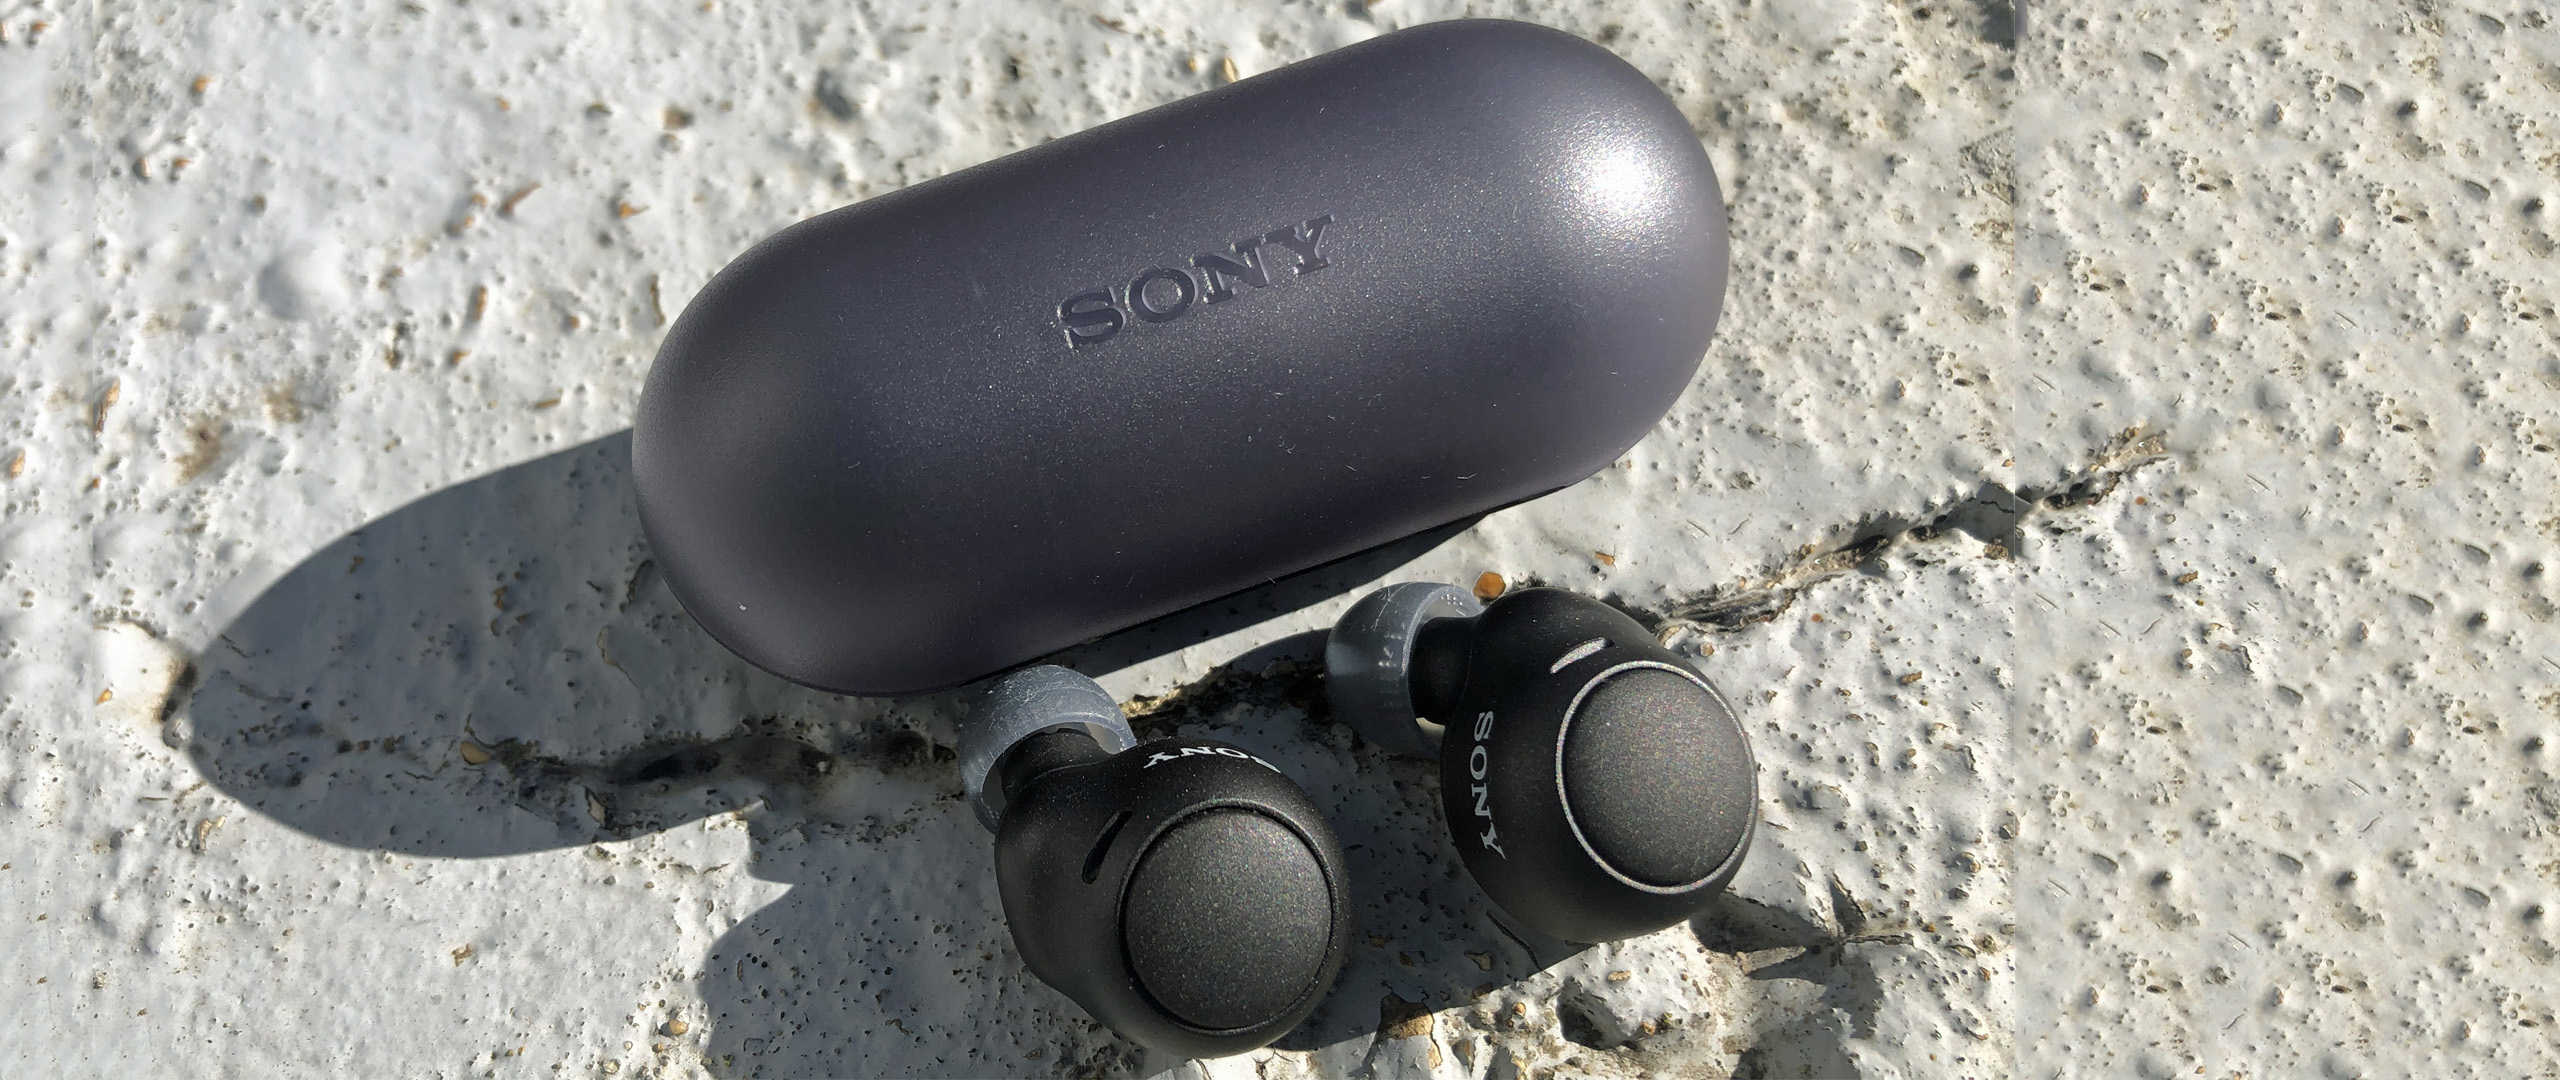 Sony WF-C500 earbuds review: basic ain't bad - The Verge